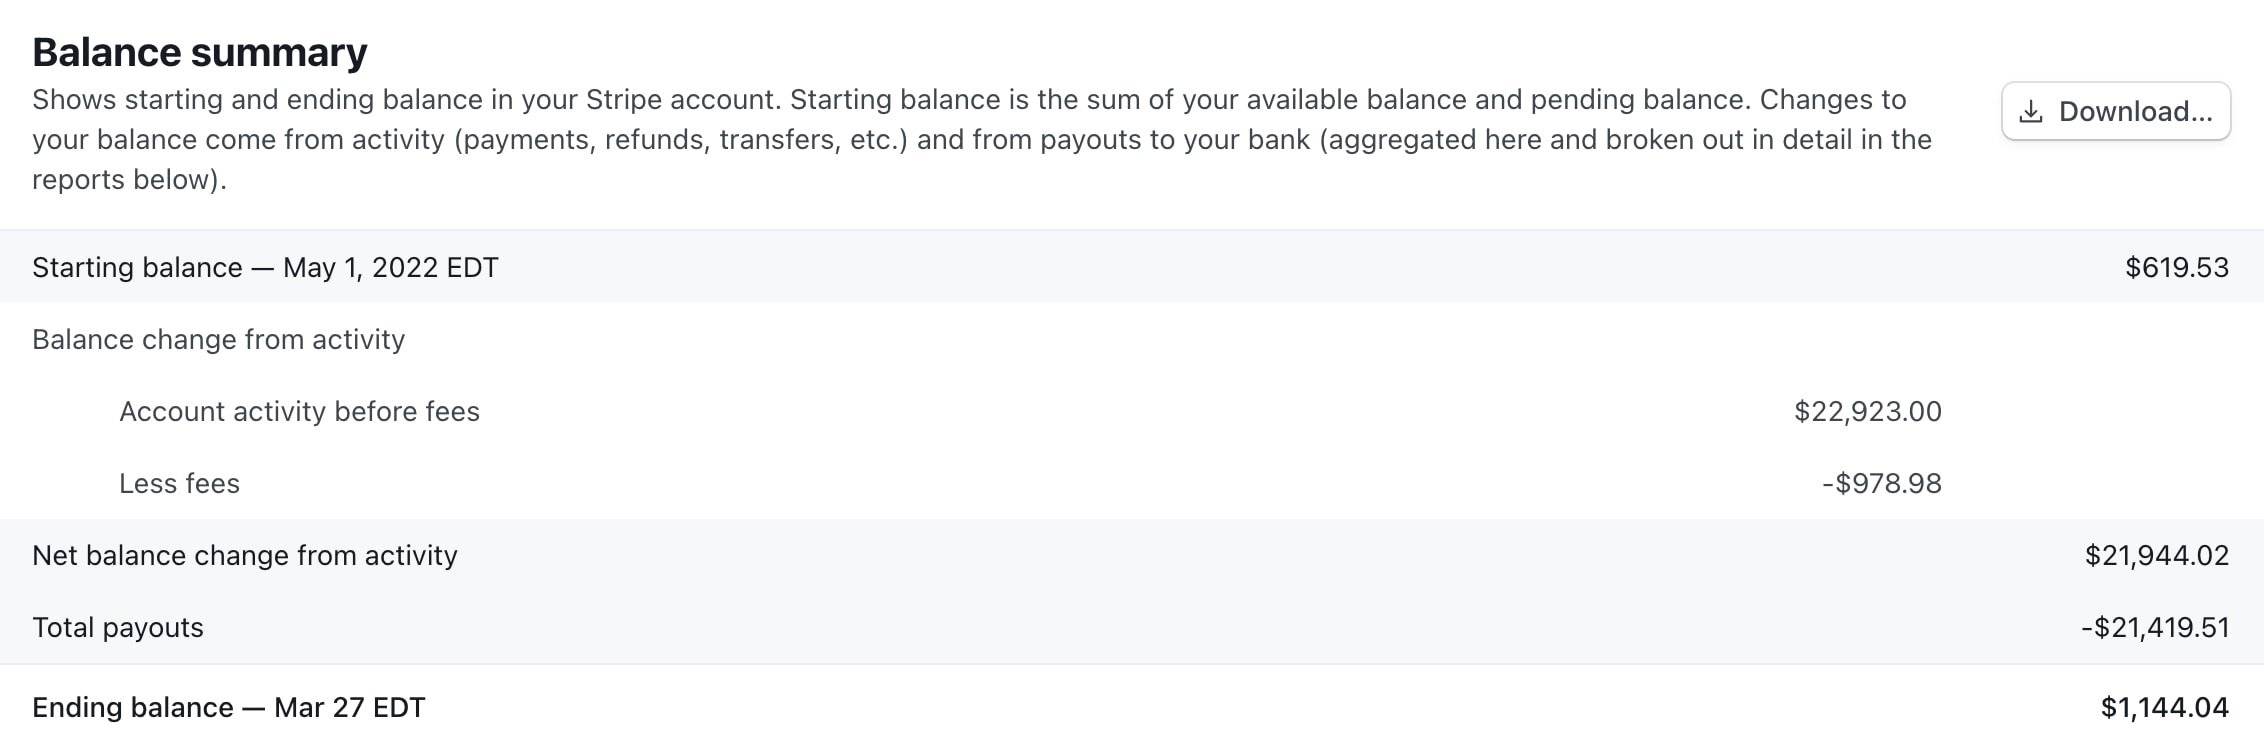 Balance summary from Stripe over 10 months